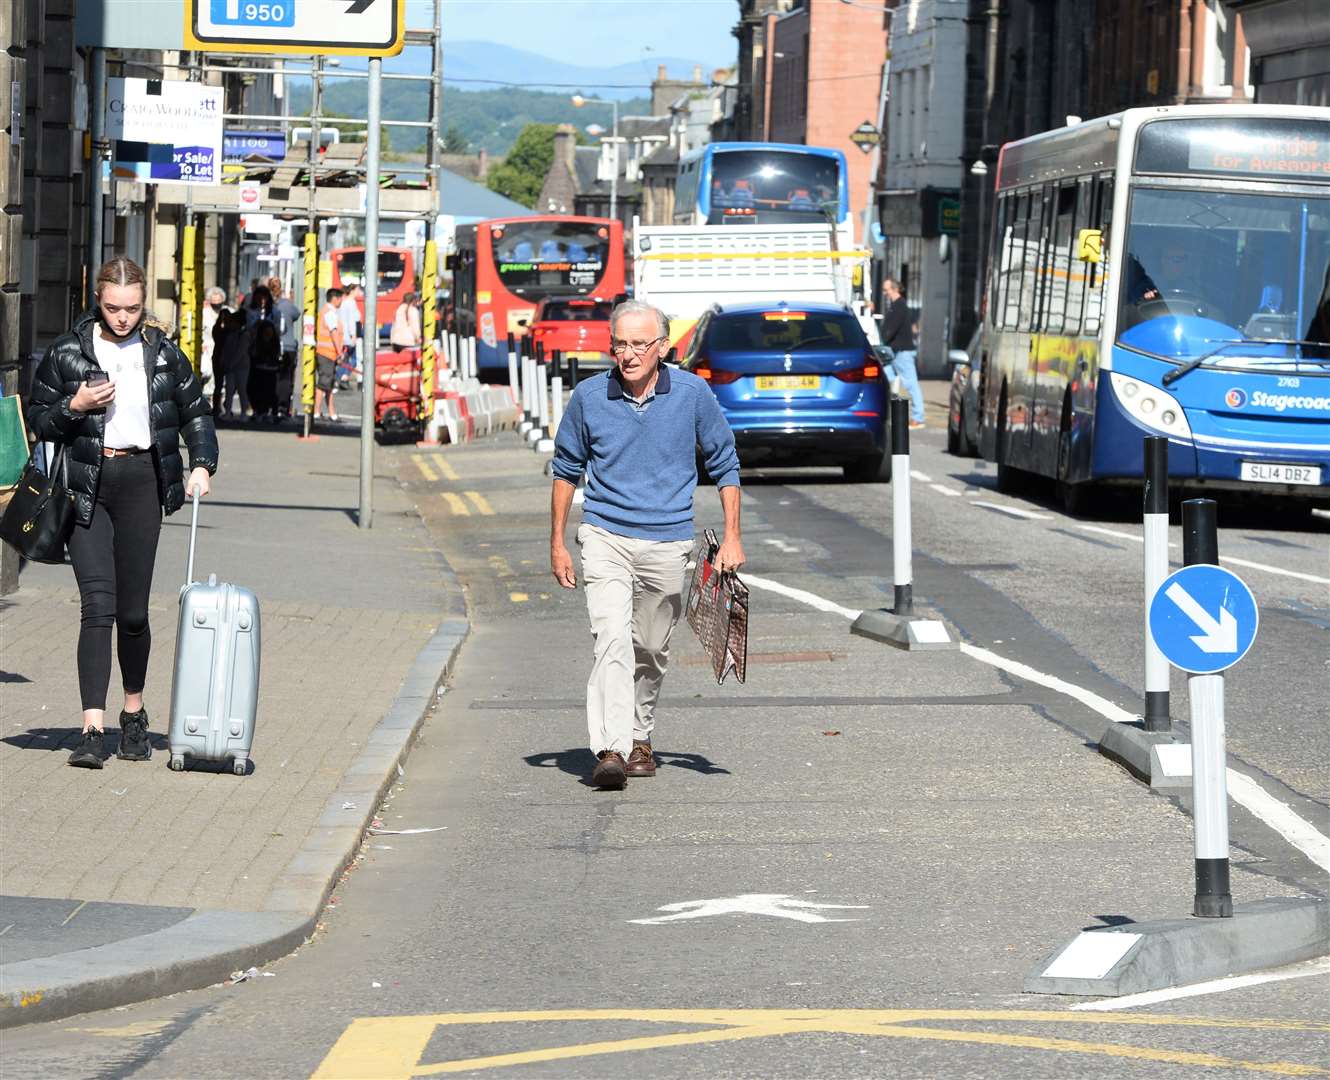 Academy Street has faced all kinds of criticism in recent years, both from pro-cycling lobbyists and those who object to Spaces for People bollards reducing road space. Picture: Gary Anthony